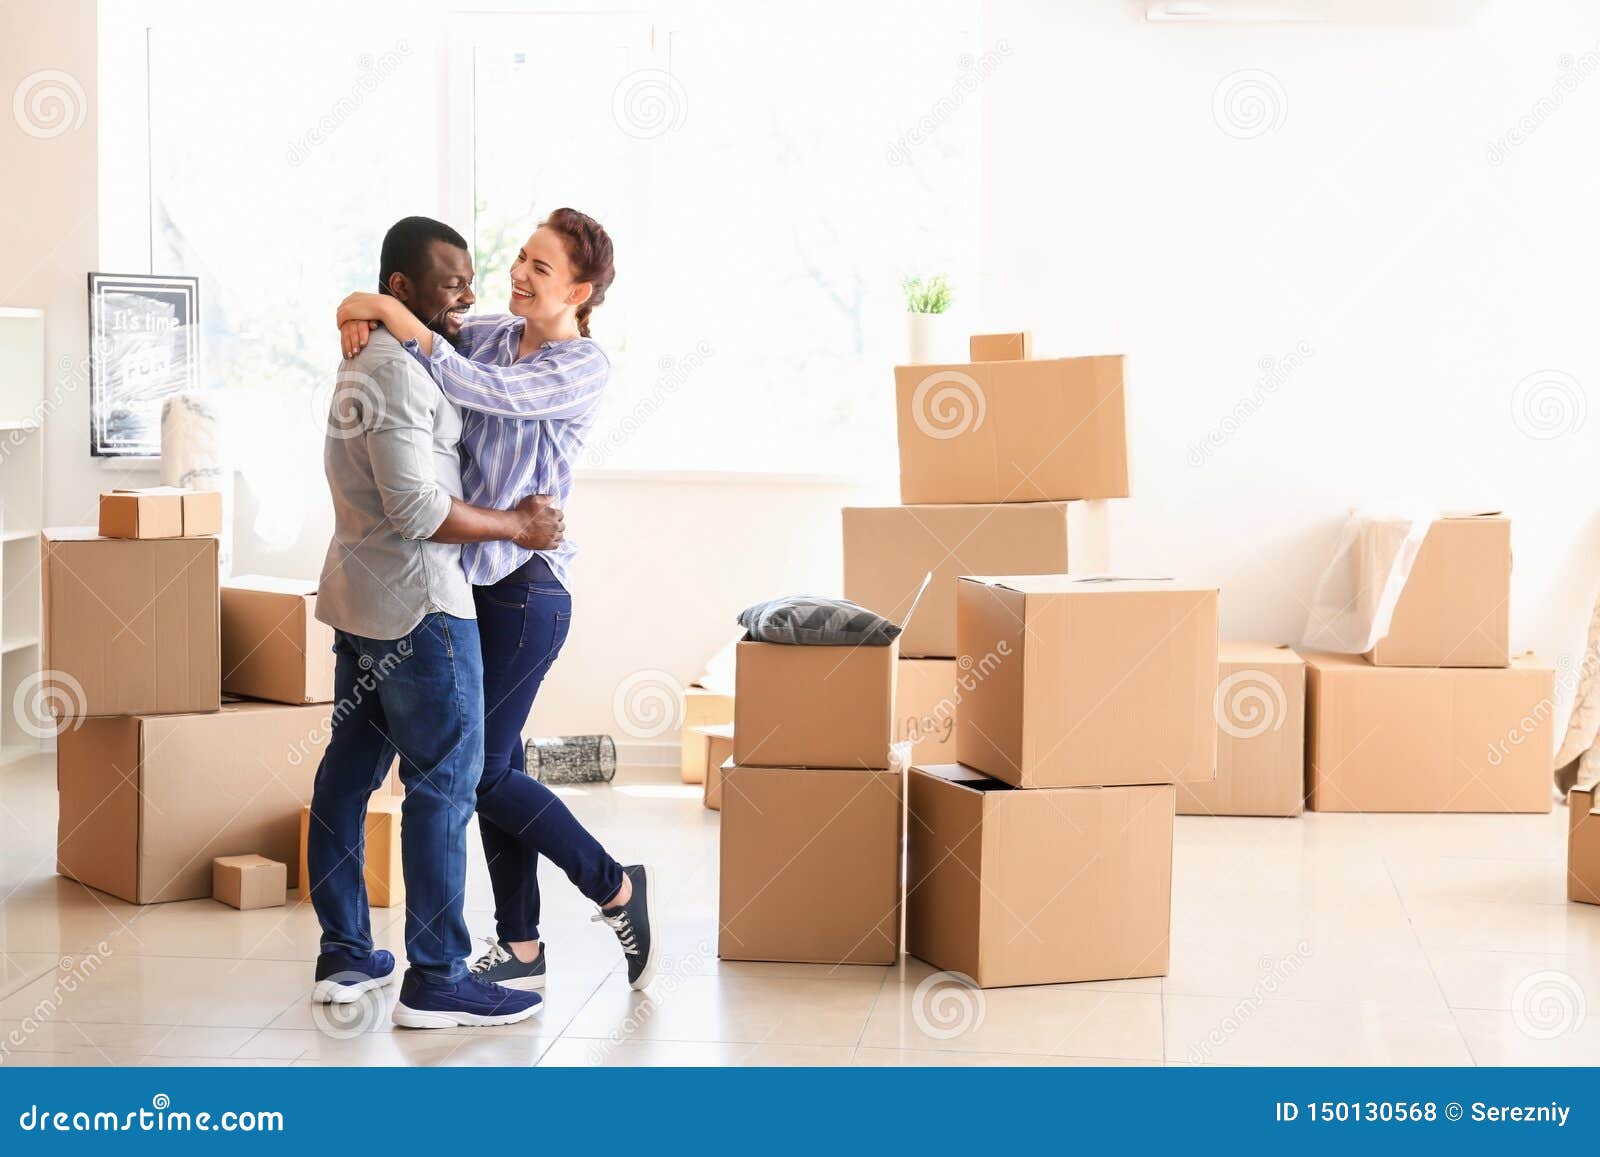 interracial couple with carton boxes in room. moving into new house